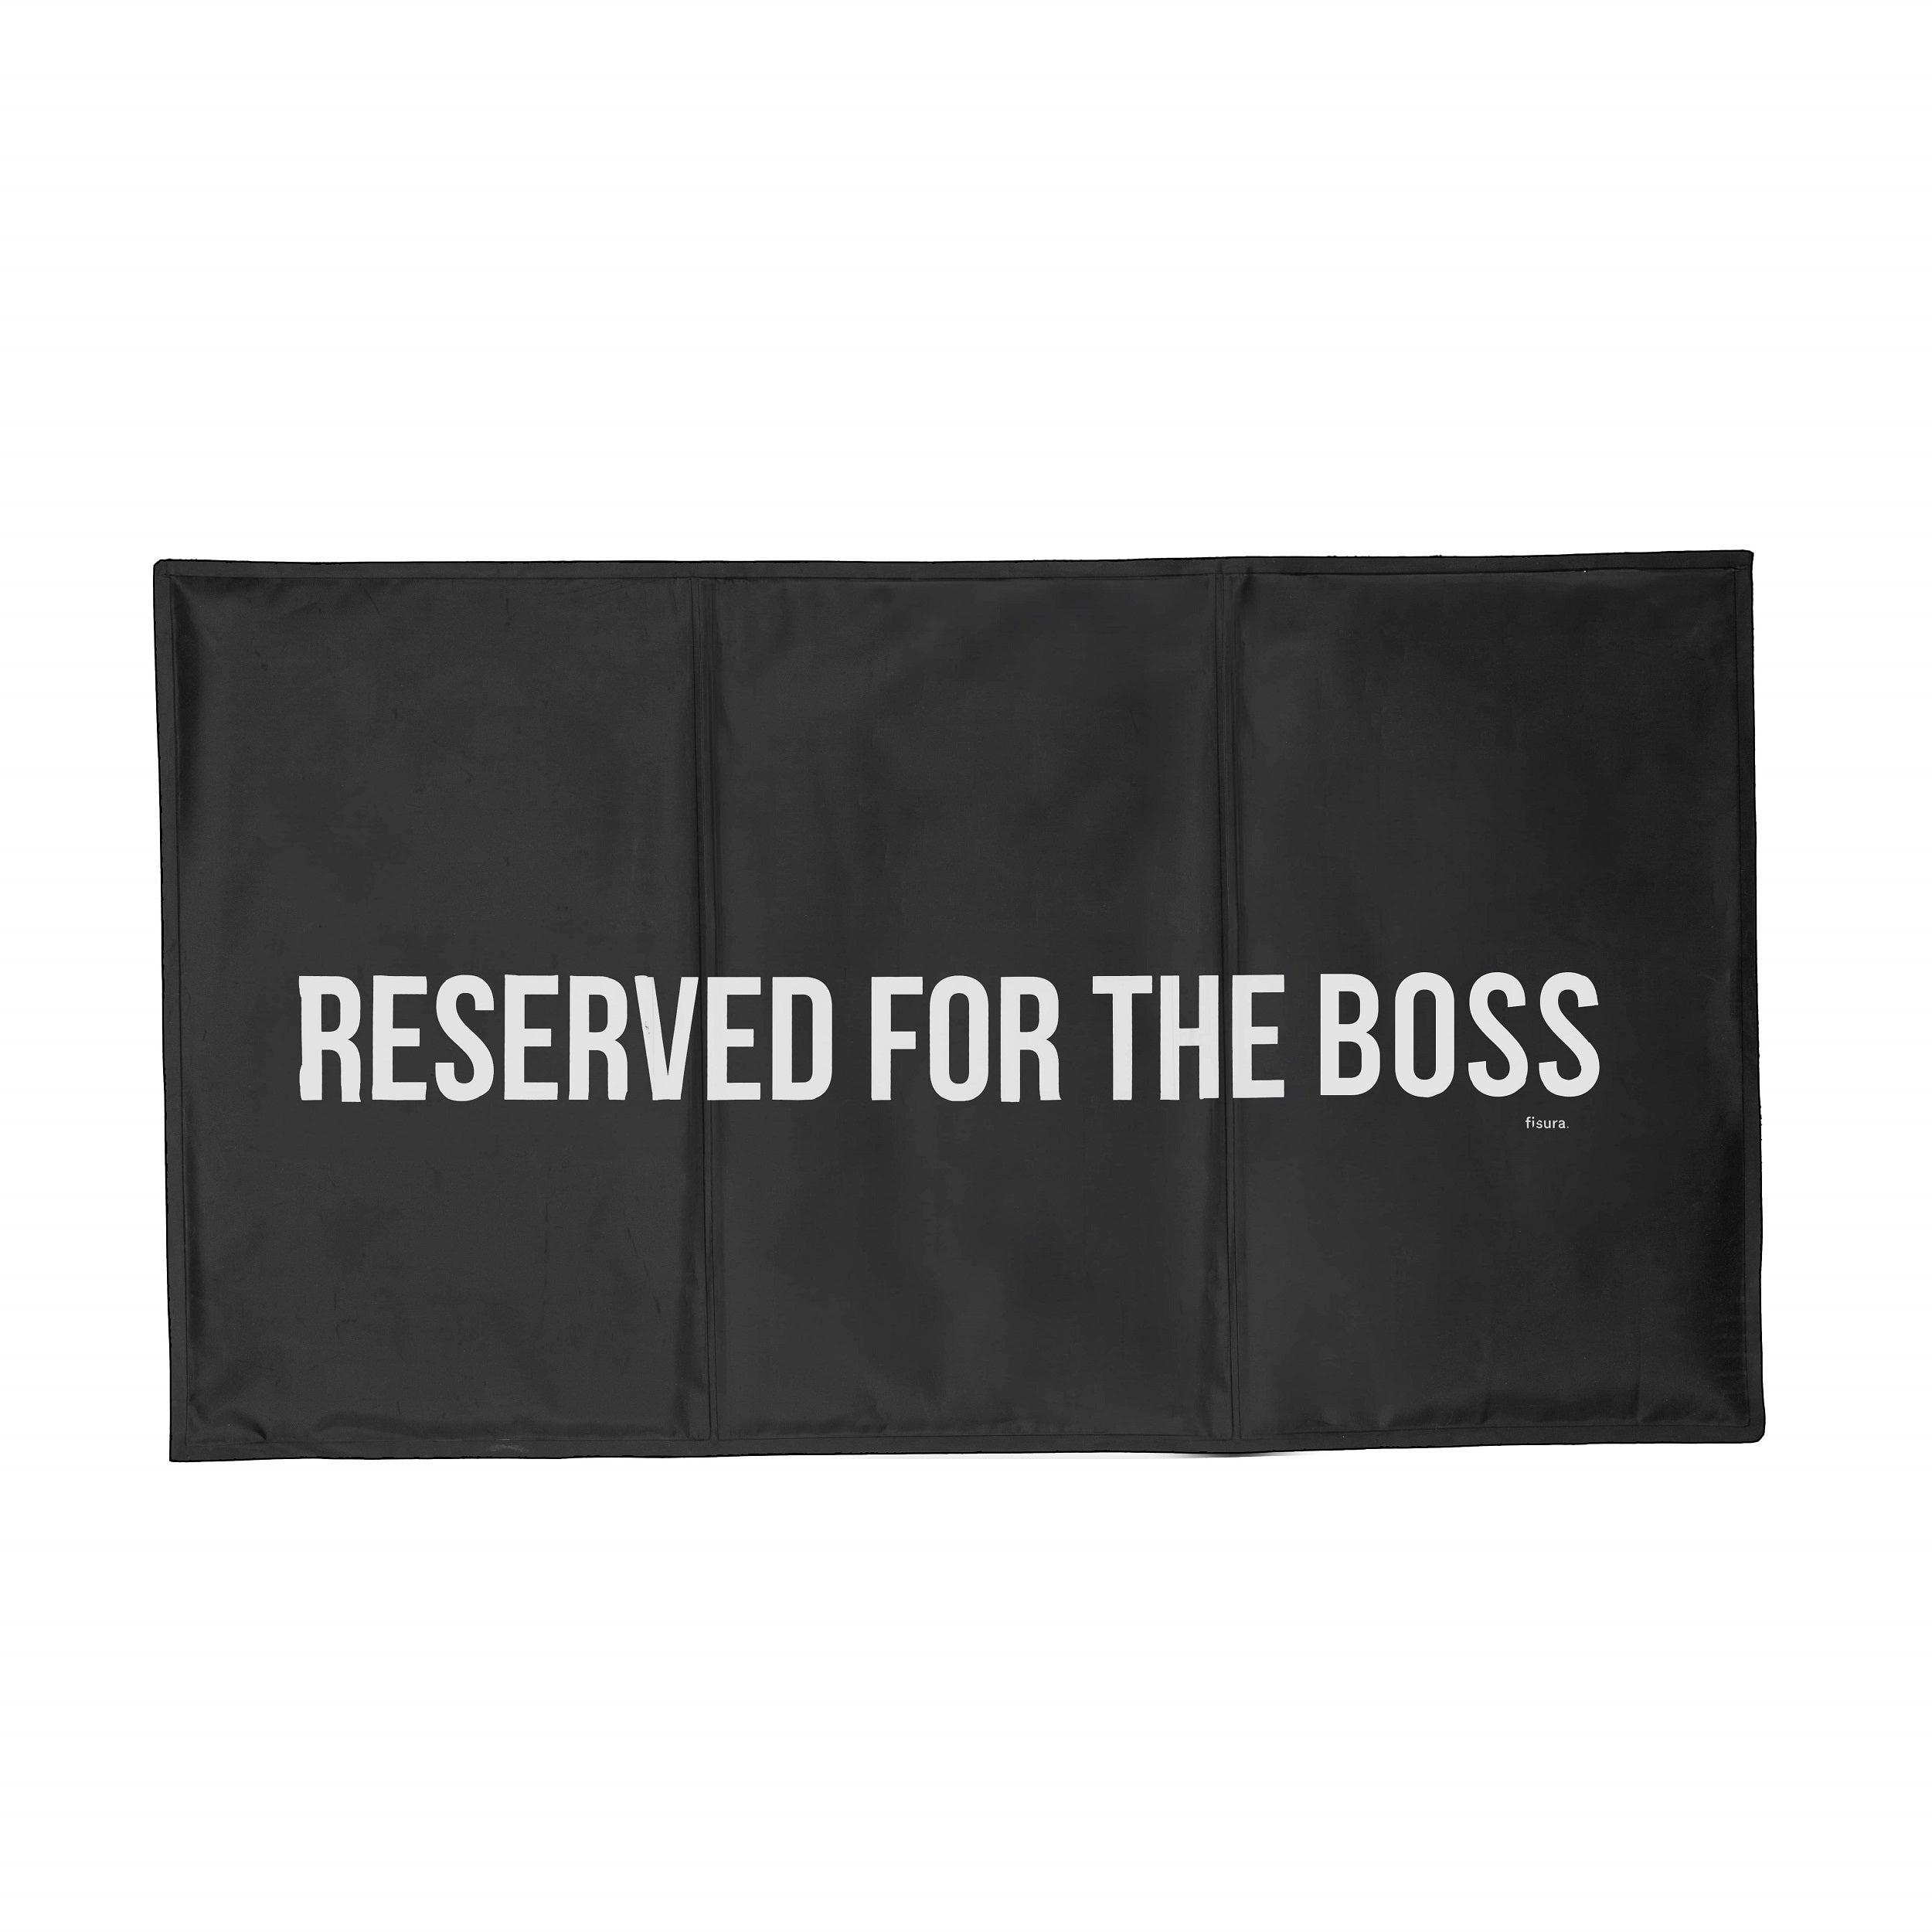 Manta refrescante para perros “reserved for the boss”